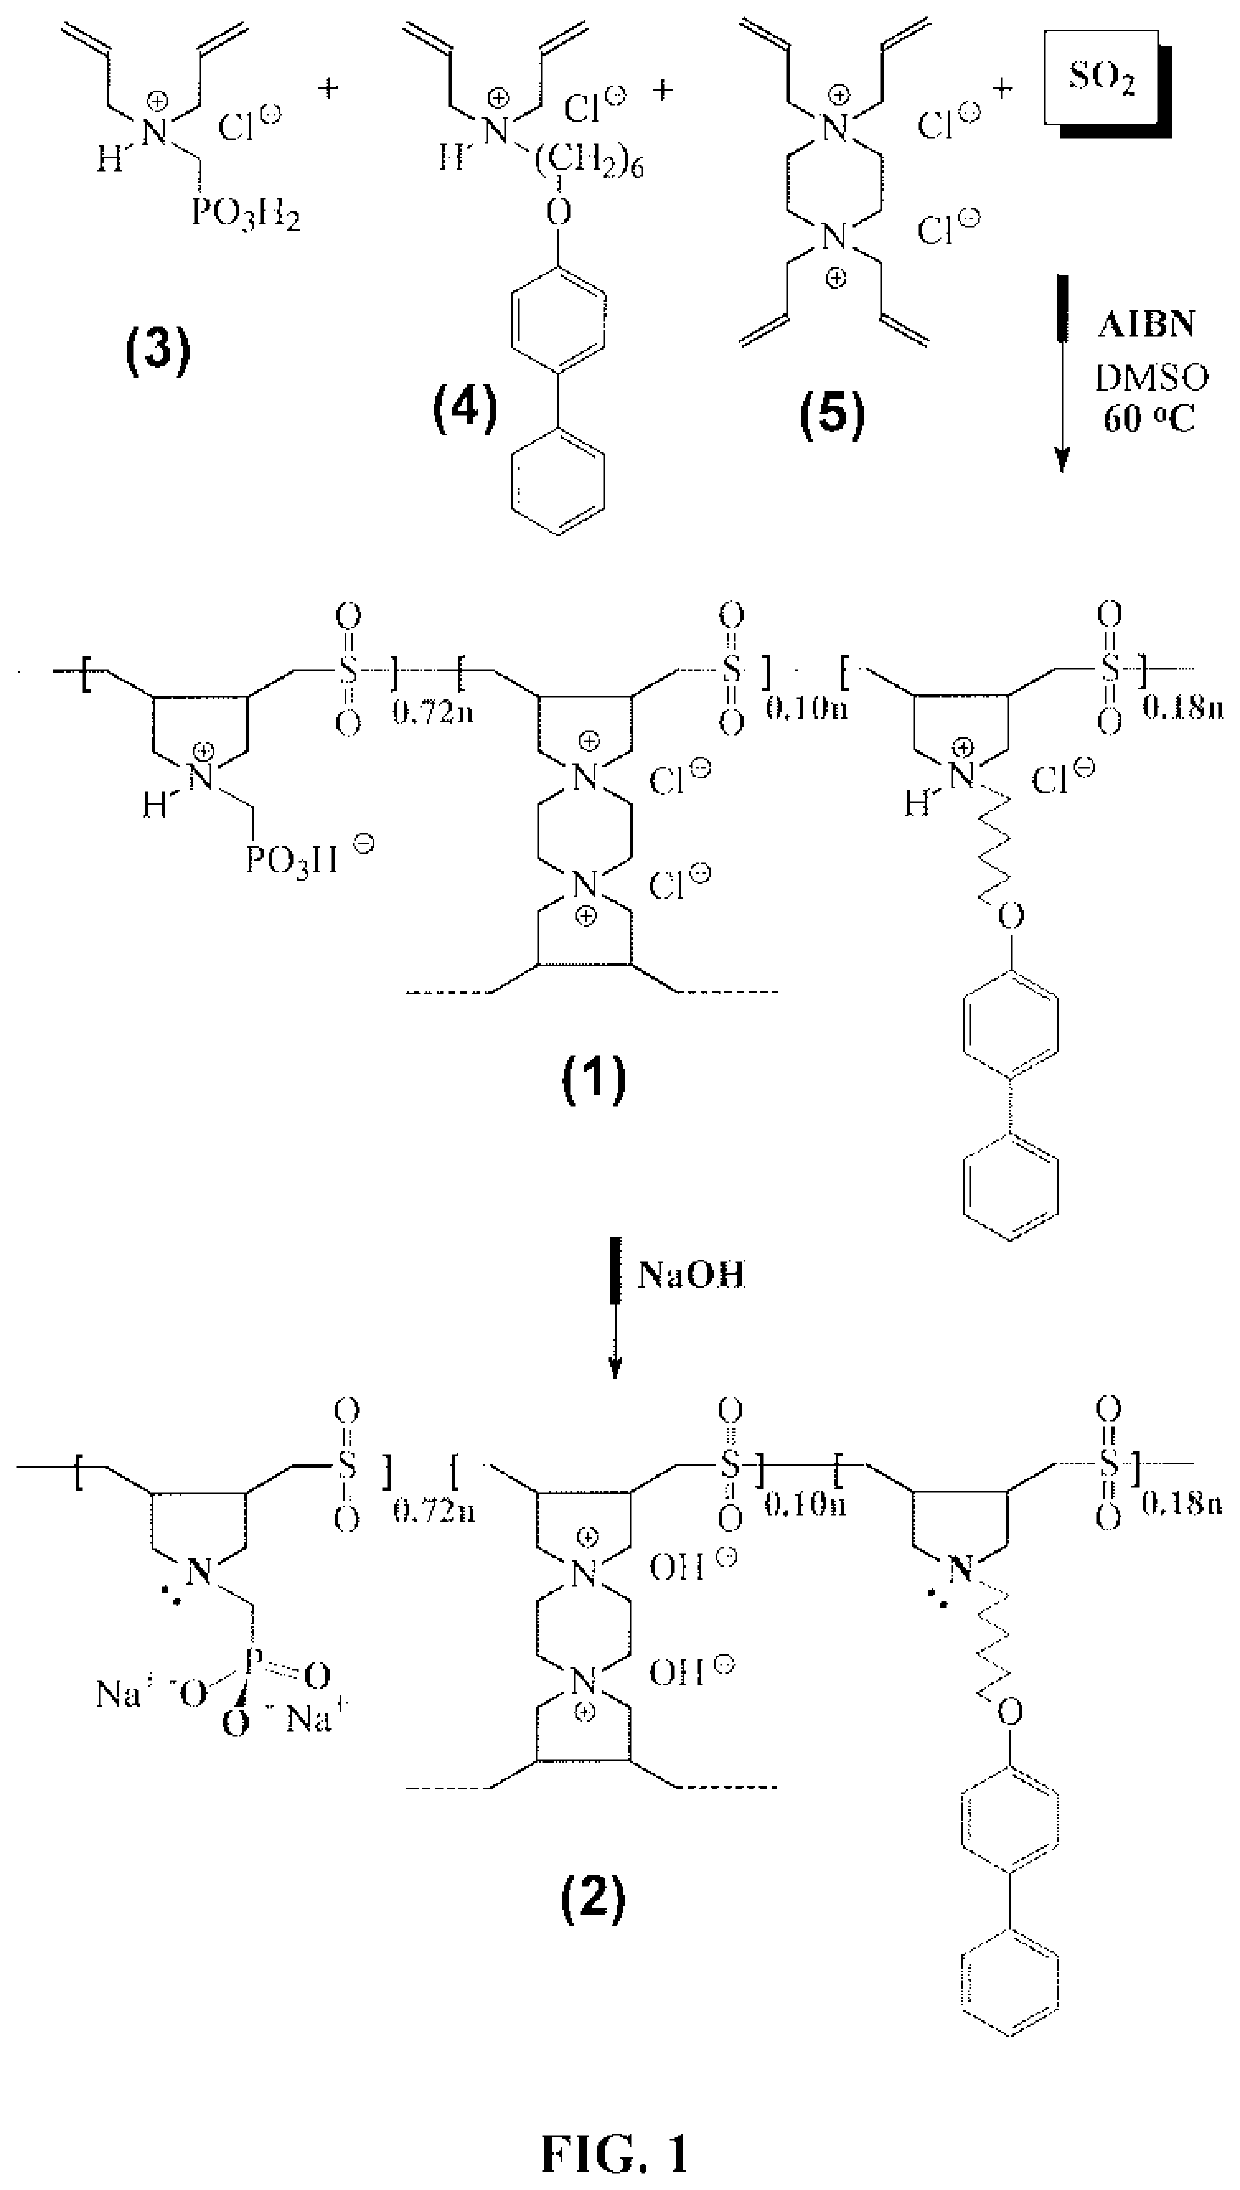 Crosslinked polymer resin for contaminant adsorption from water